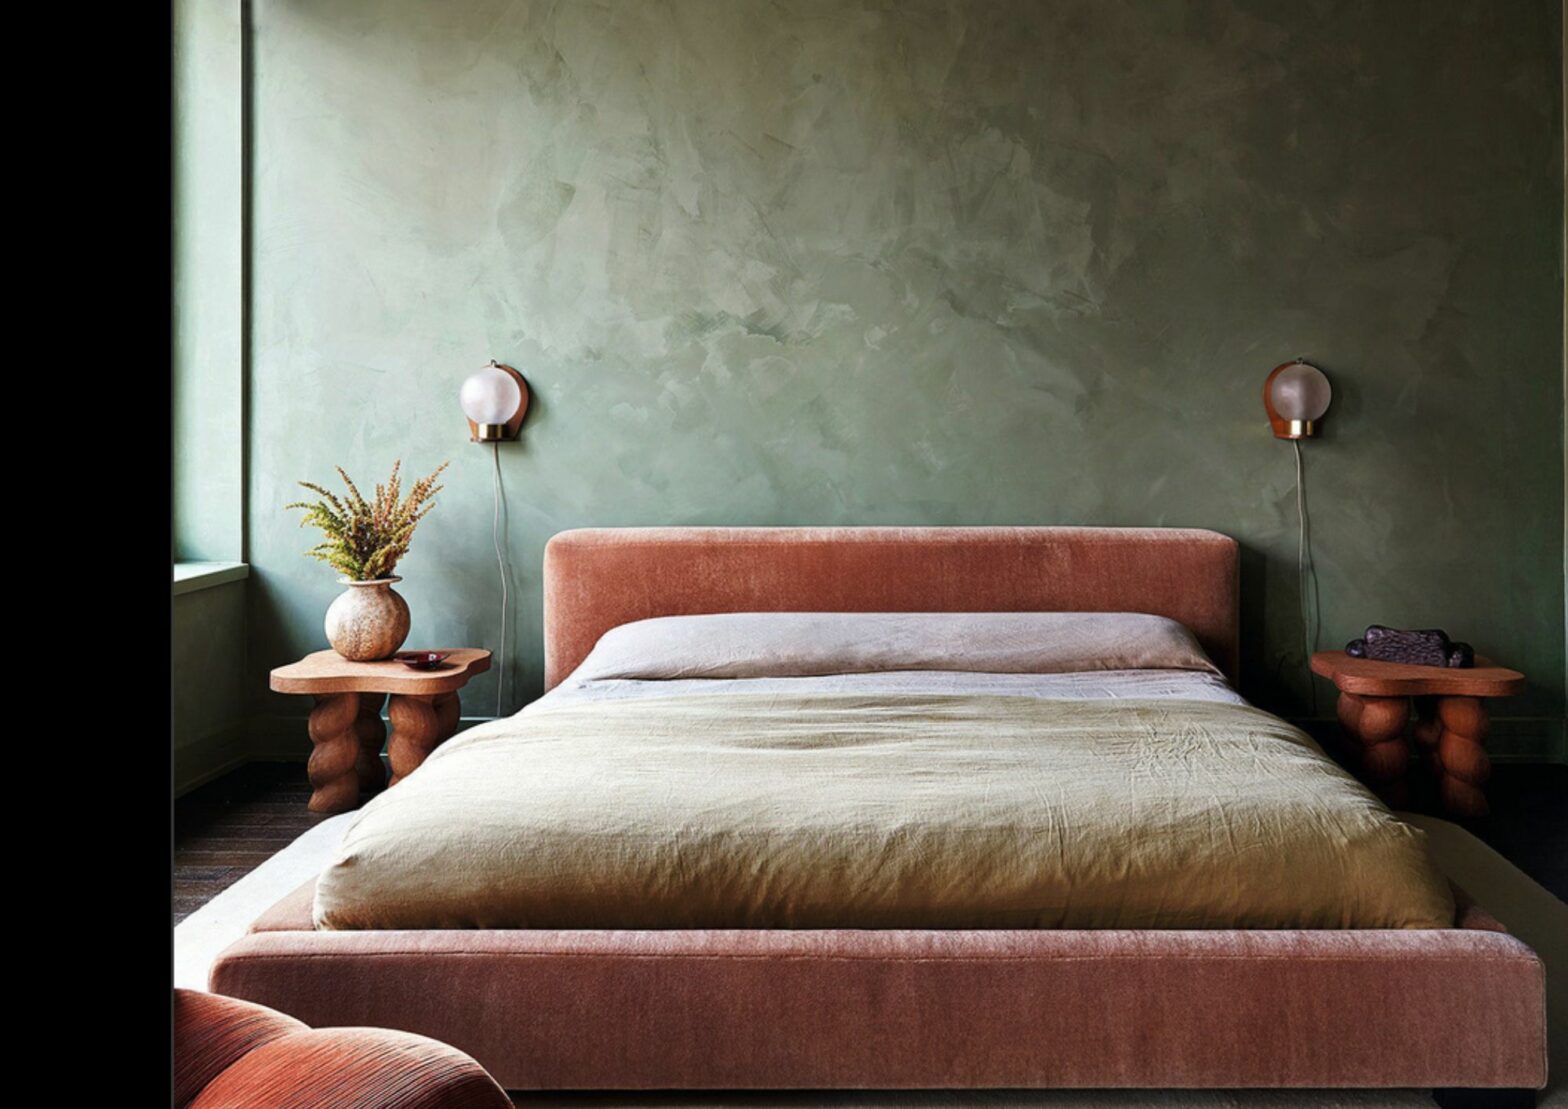 Contemporary bedroom with green limewash walls and soft pink upholstered bed. Two wall-mounted bedside bulbs and a vintage wooden bedside table.